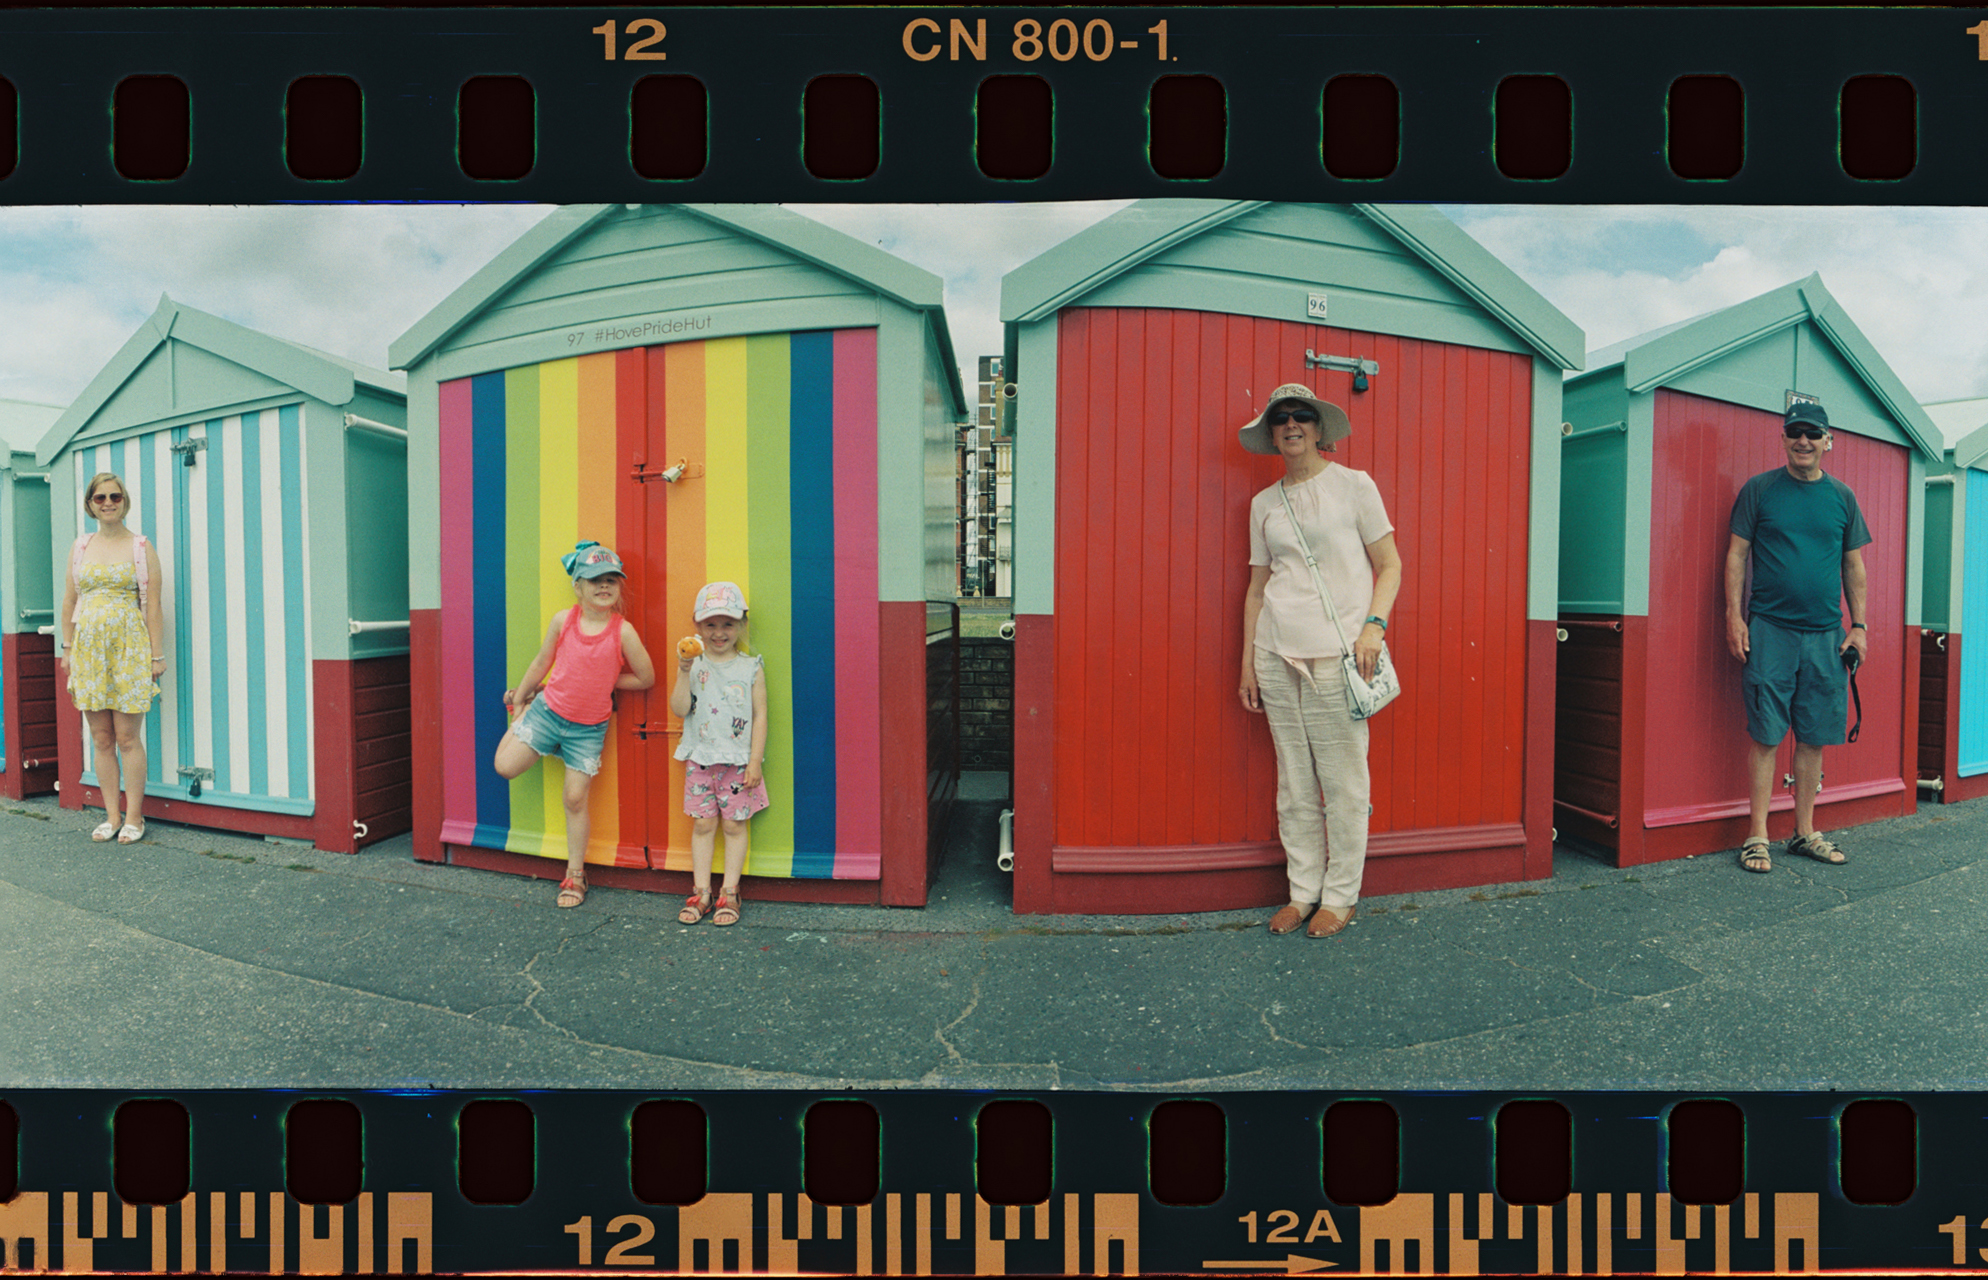  Here’s my family against beach huts in brighton.   kind of fun shot! 